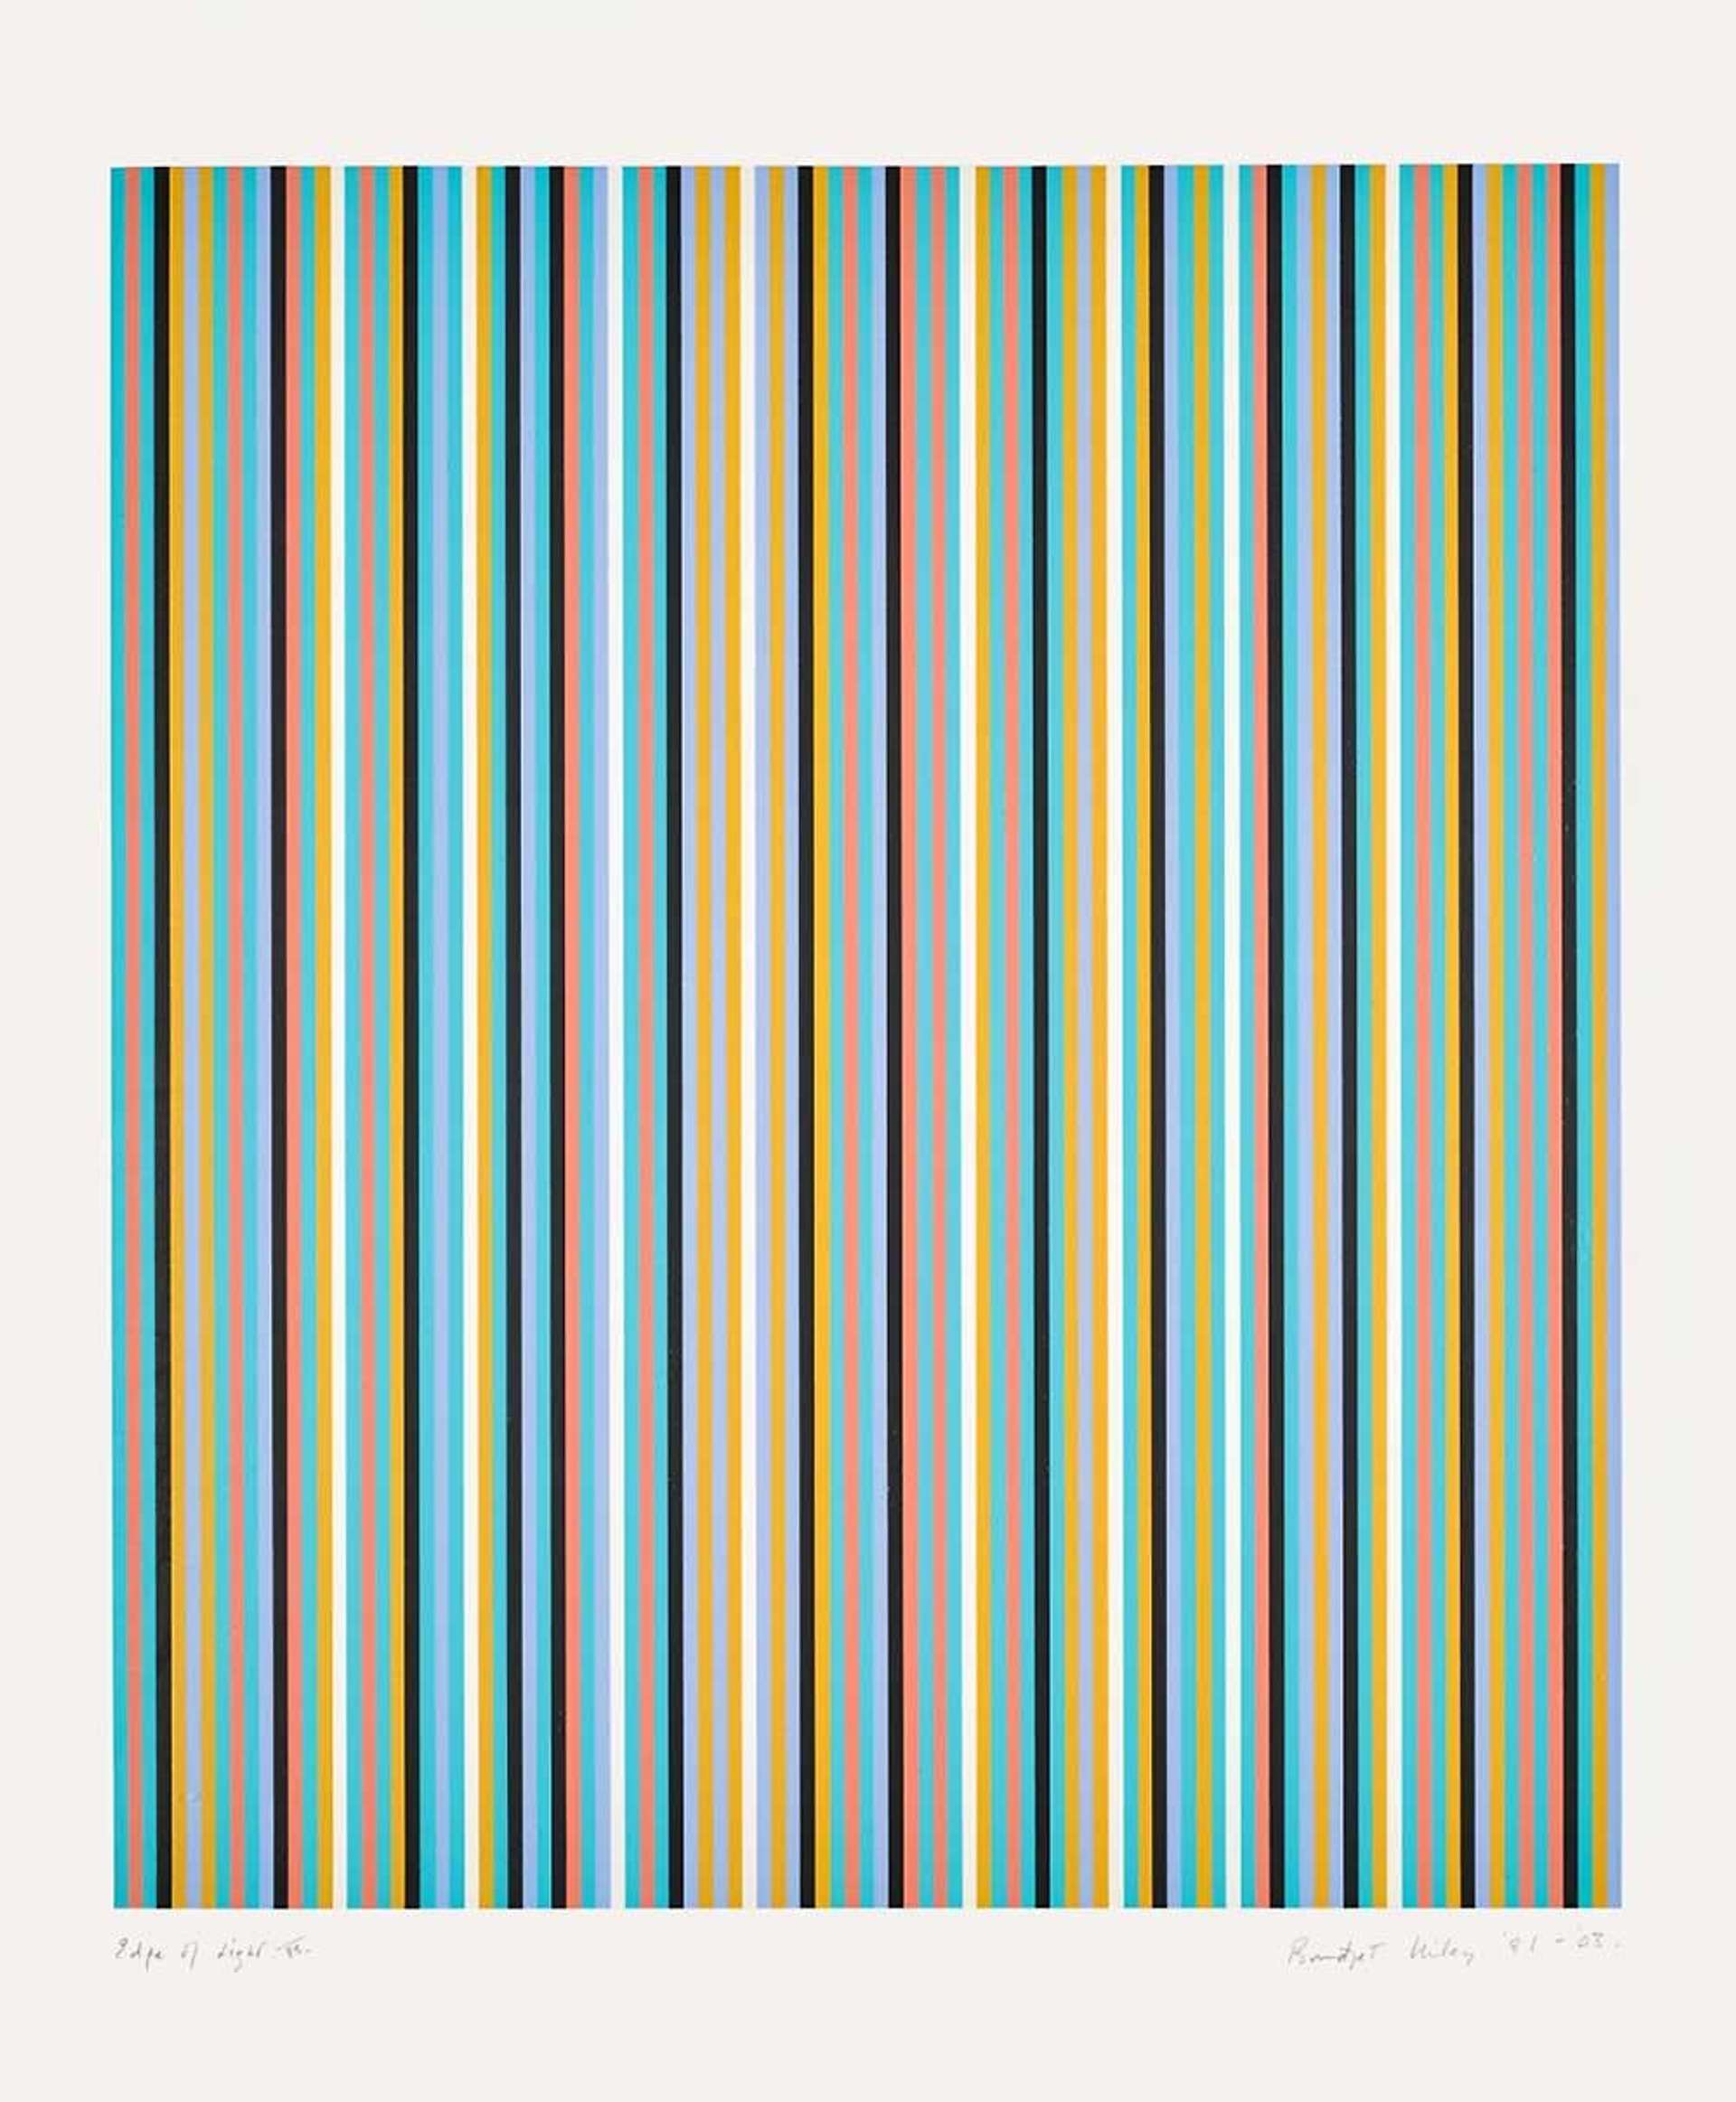 Composed of several pastel-hued colours, black stripes appear at semi-regular intervals to contain and break the orchestrated, horizontal colour scheme. 